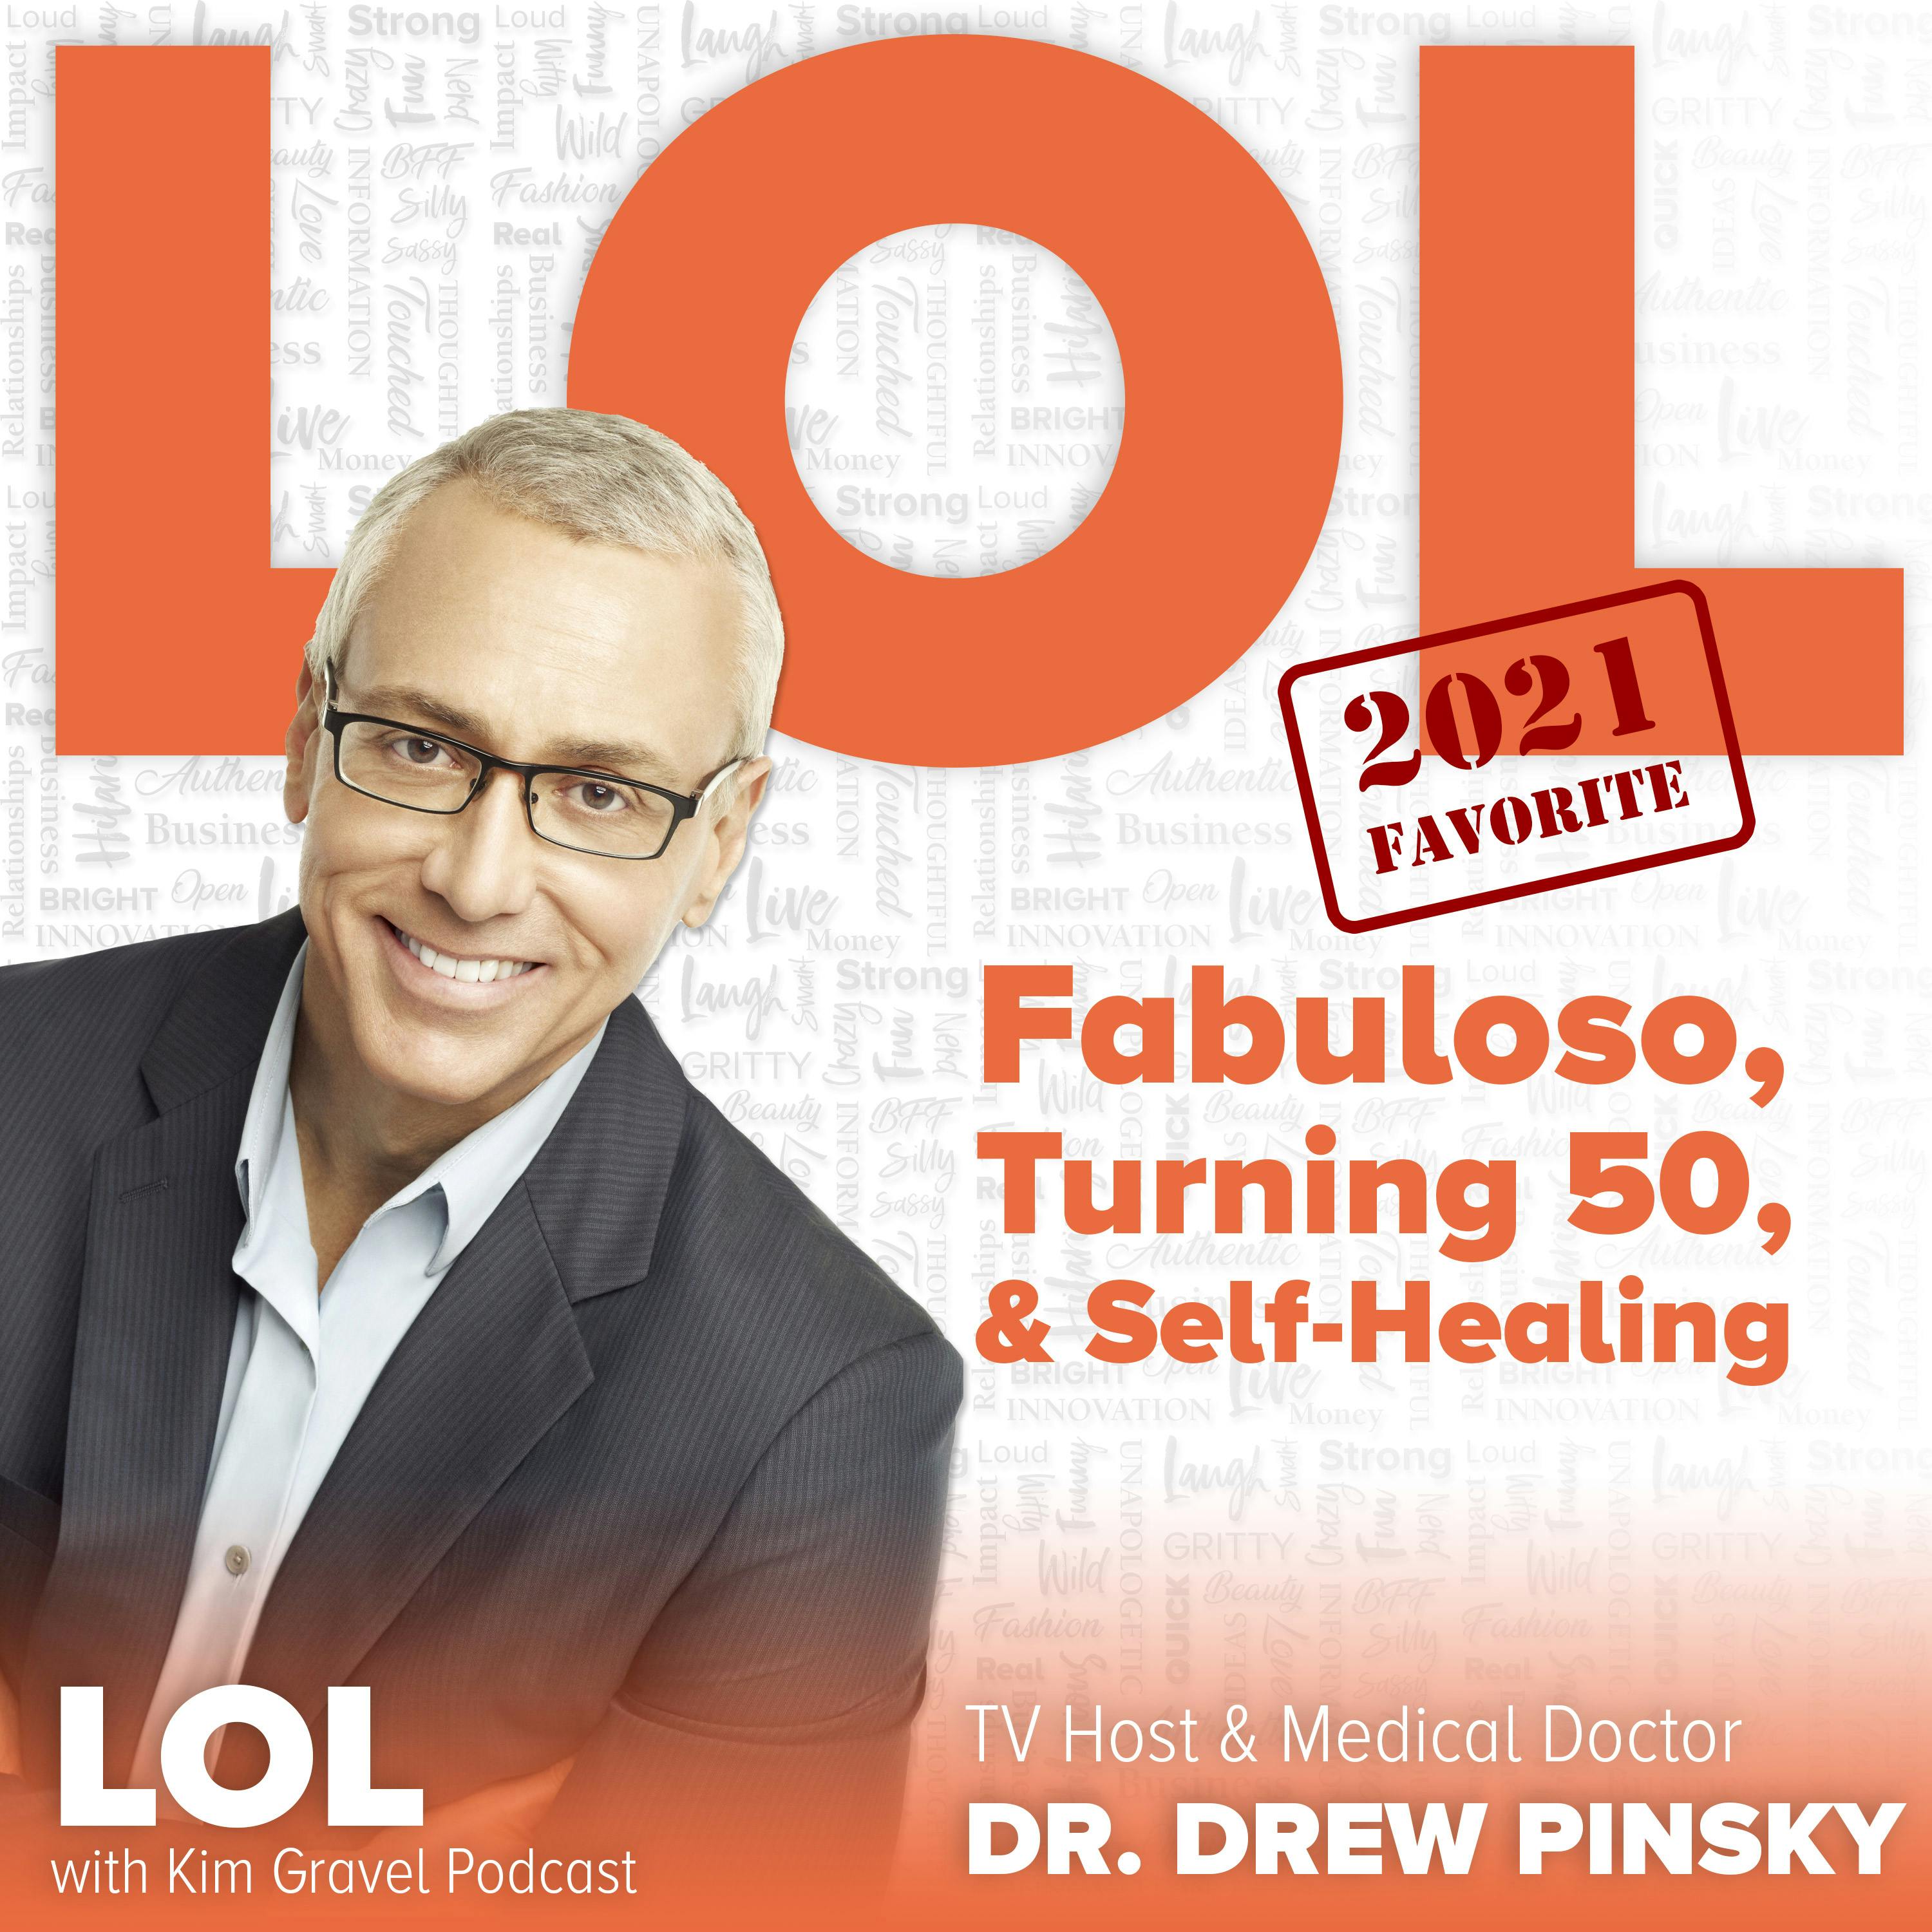 2021 Favorite: Fabuloso, Turning 50 and Self-Healing with Dr. Drew